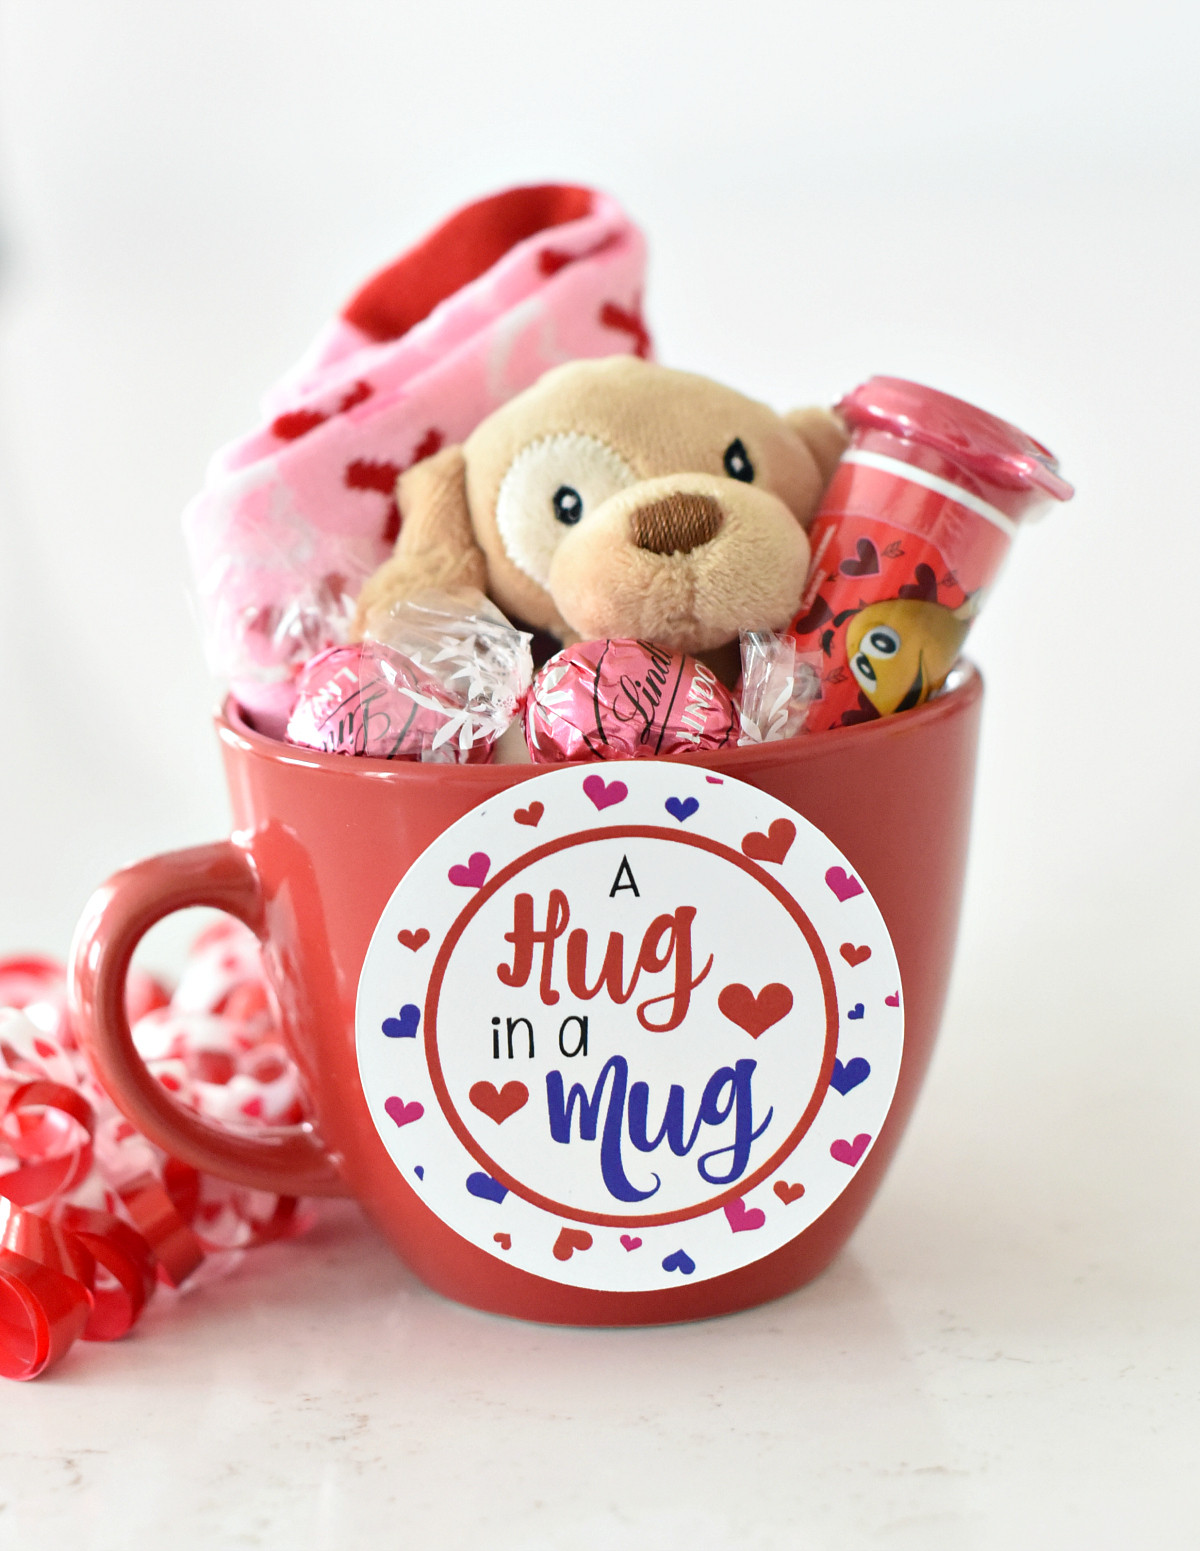 Ideas For Valentines Day Gift
 Cute Valentine s Day Gift Idea RED iculous Basket